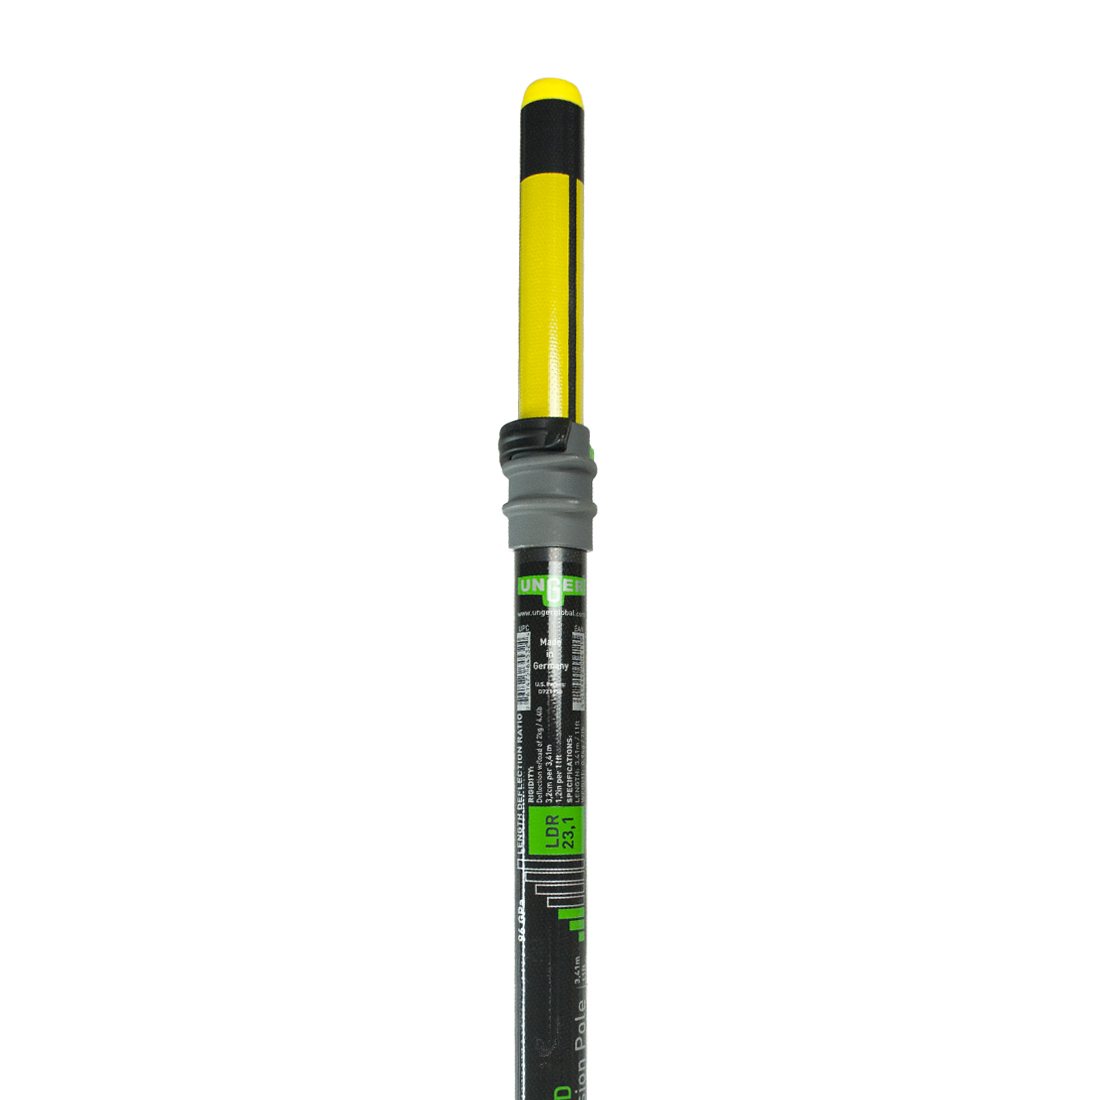 Unger nLite Hybrid Extension Pole - 11 Foot - Top Section View